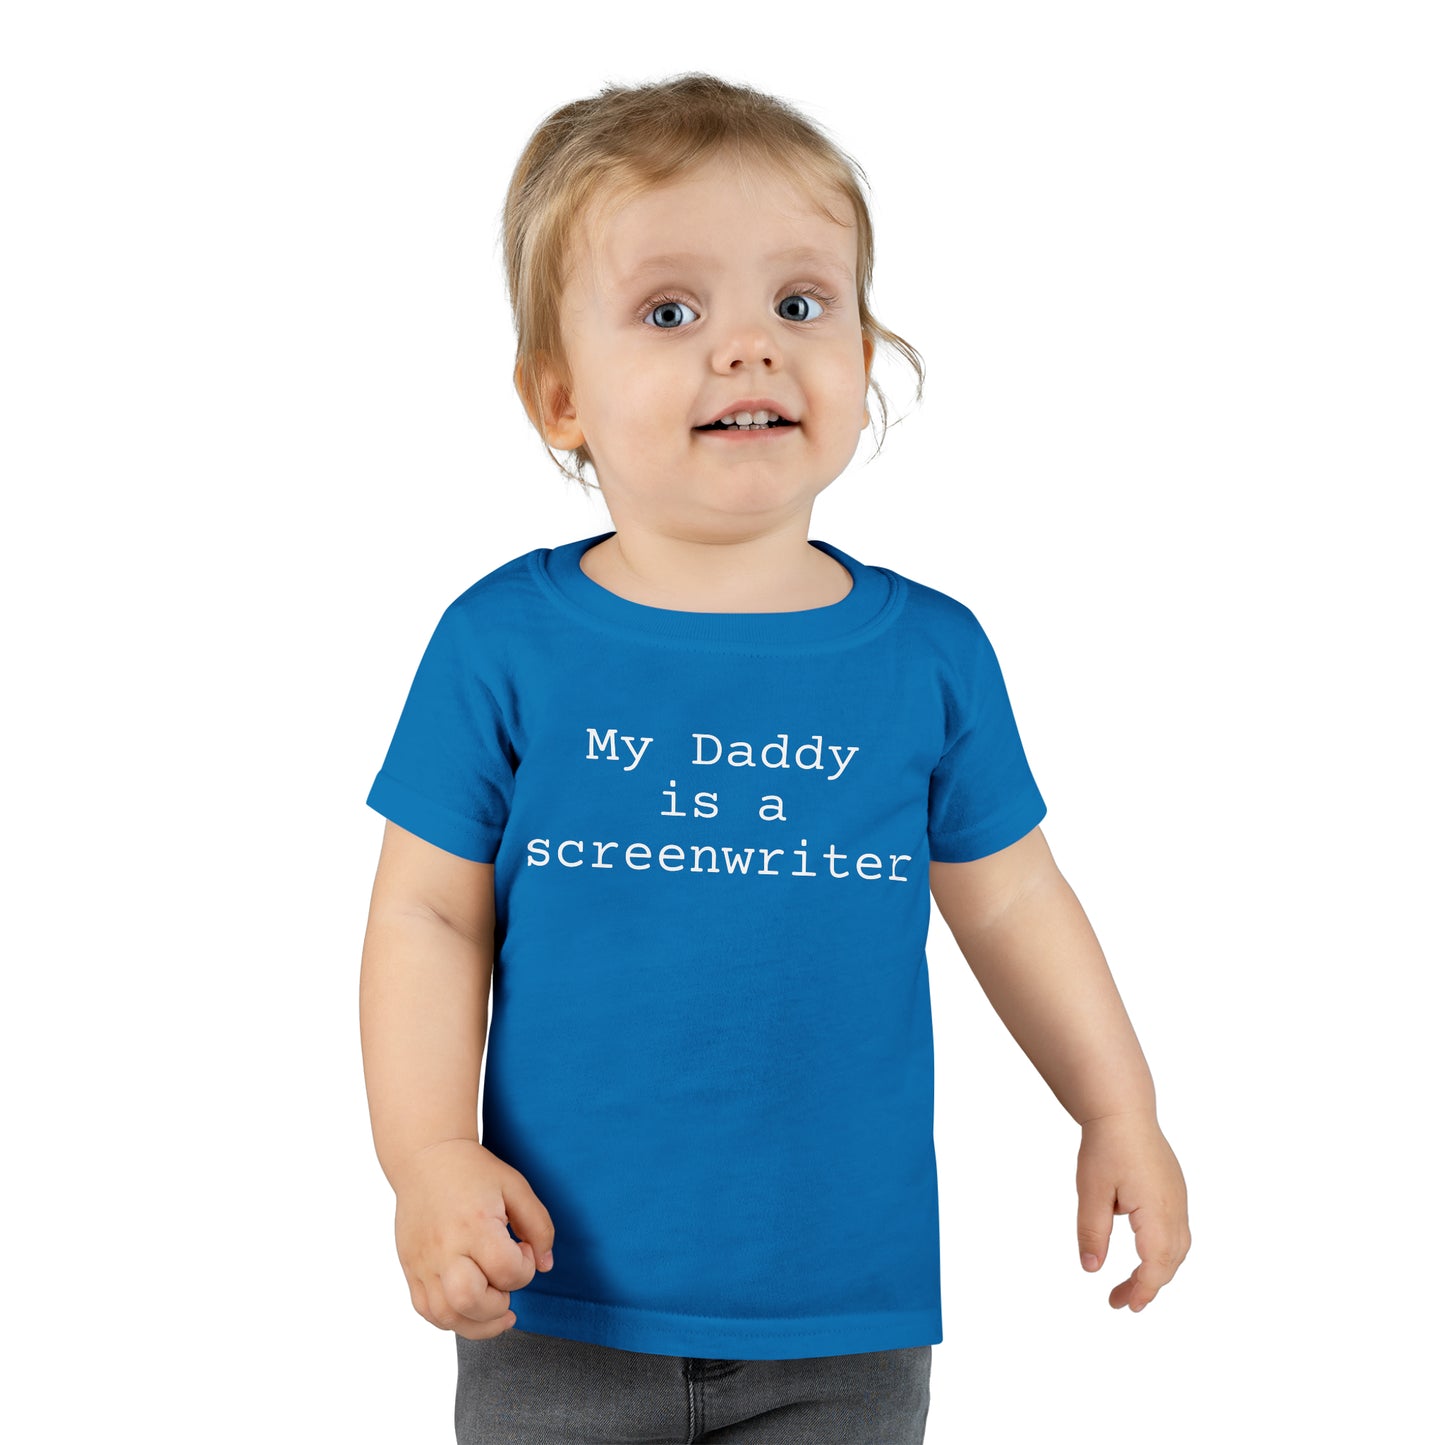 My Daddy is a Screenwriter Toddler T-shirt